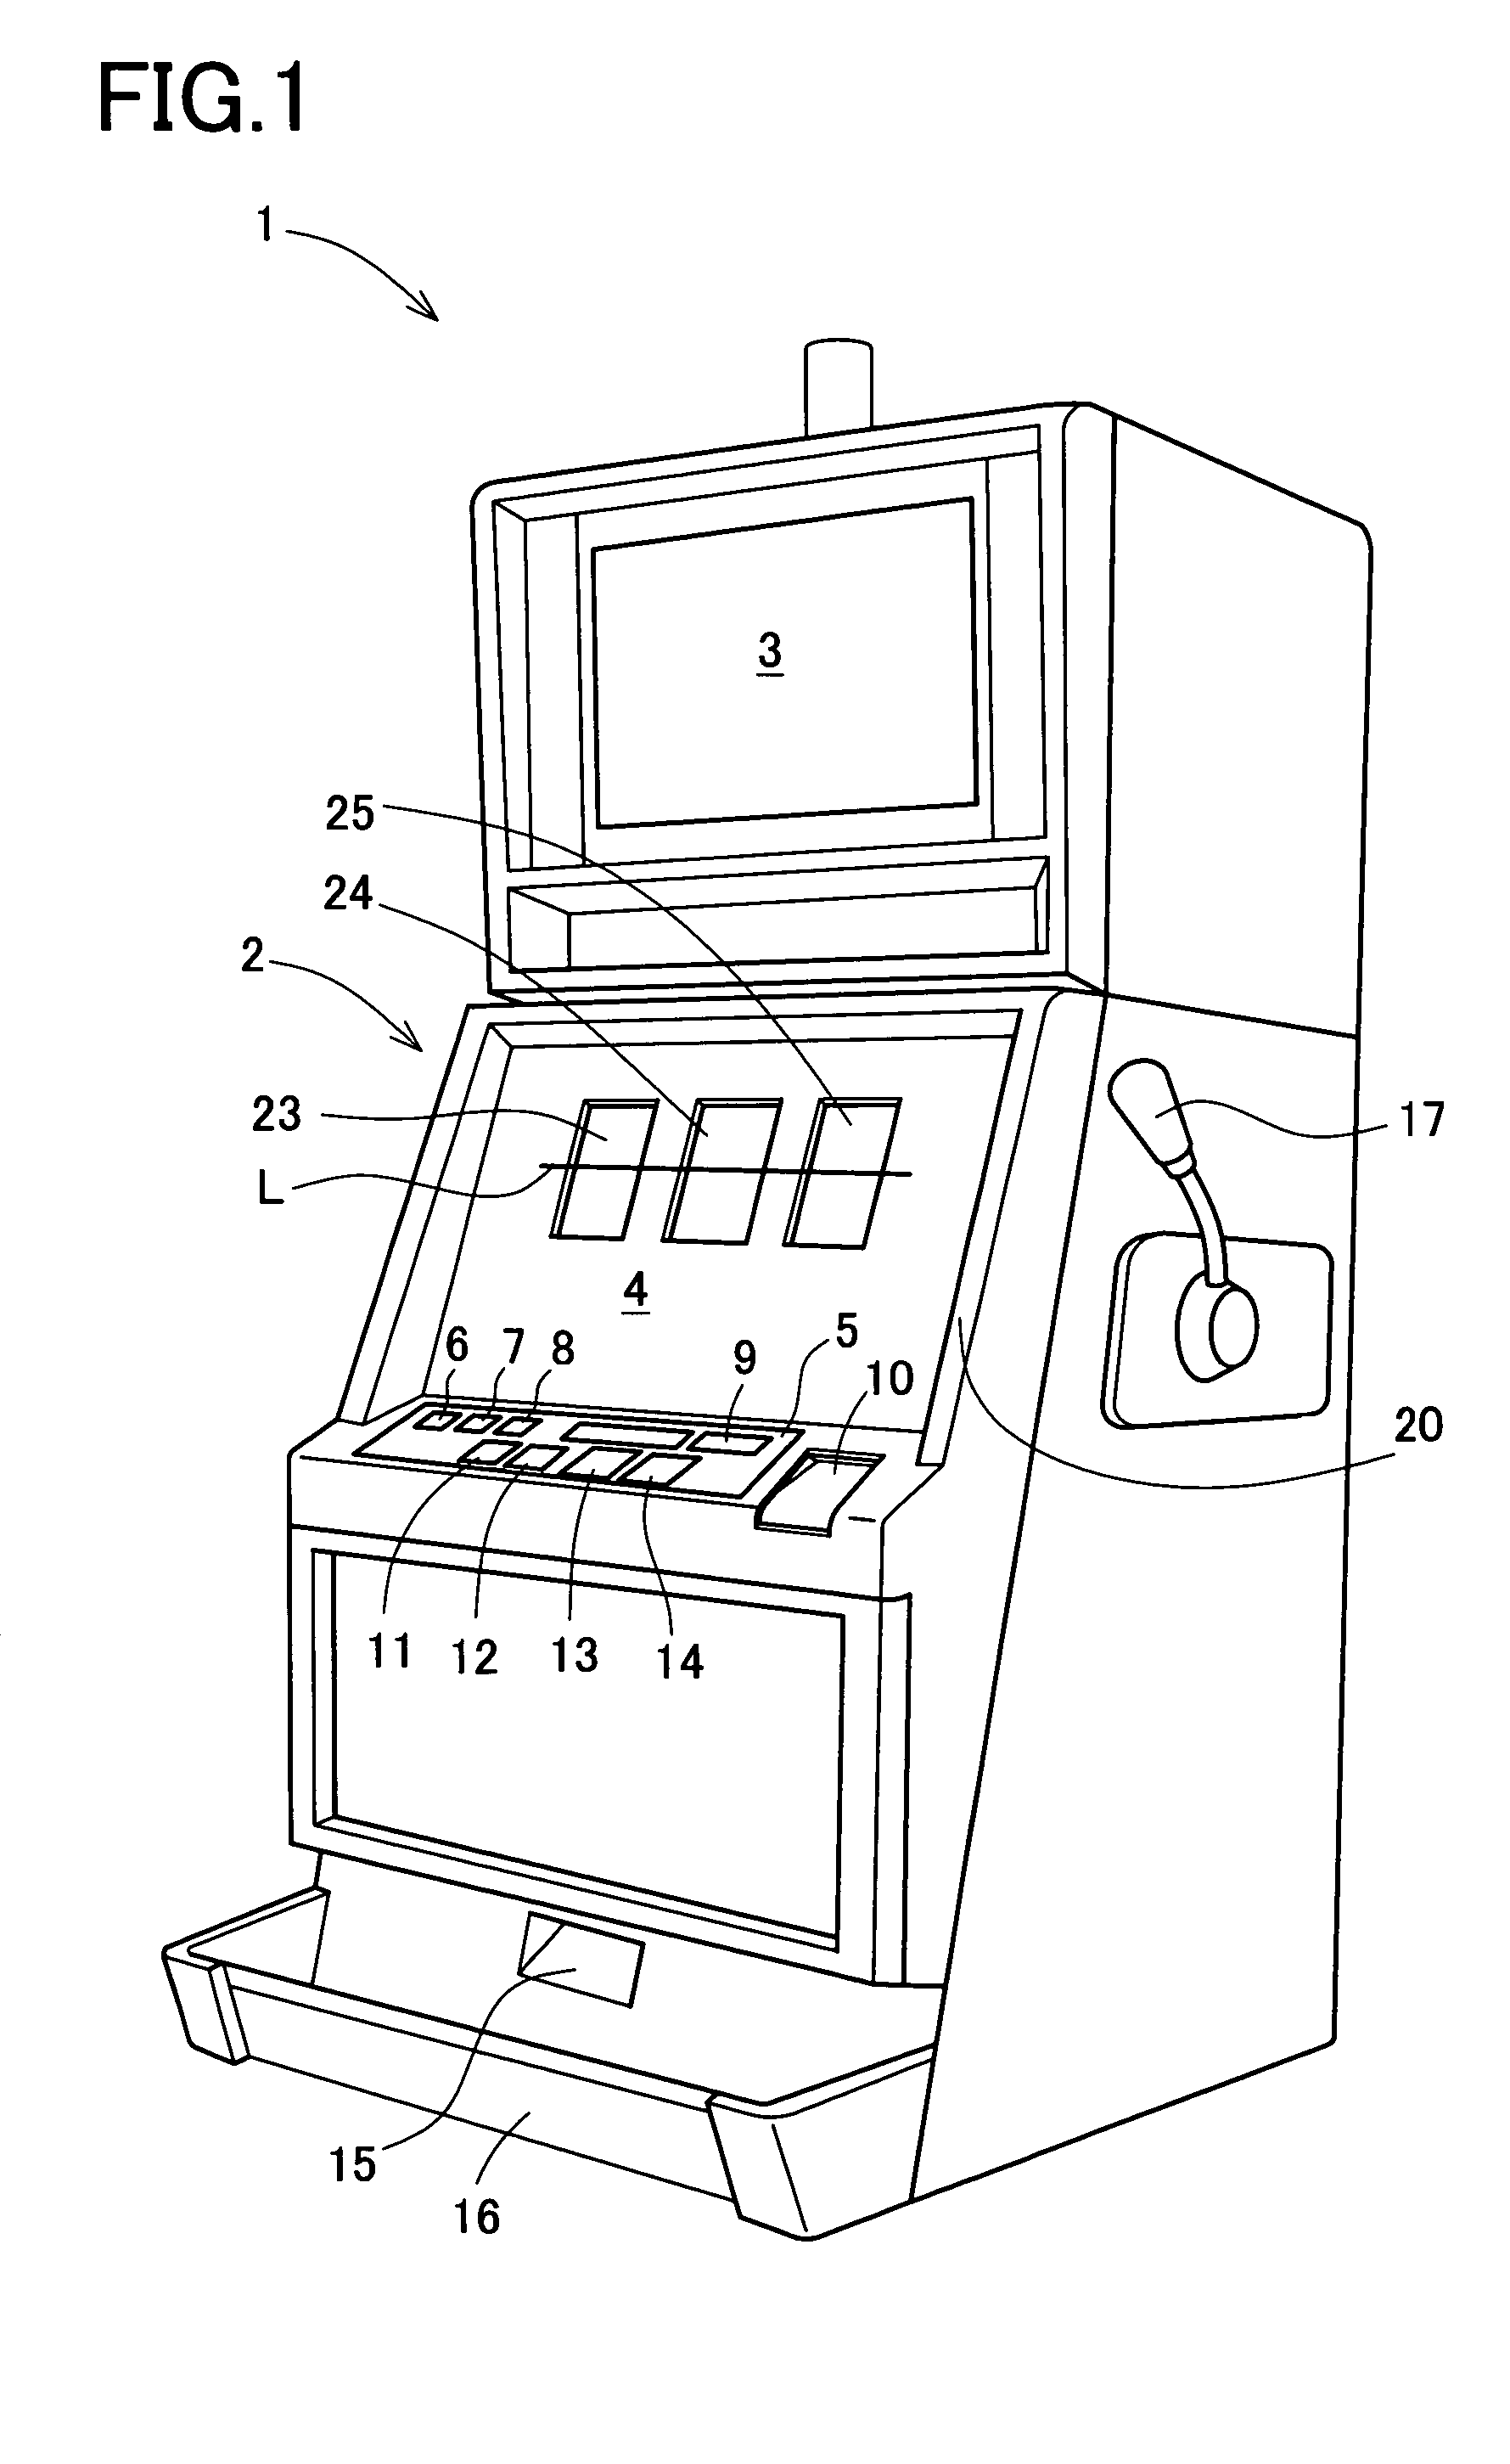 Gaming machine with reels and display device displaying characters thereon, reels being seen through display device